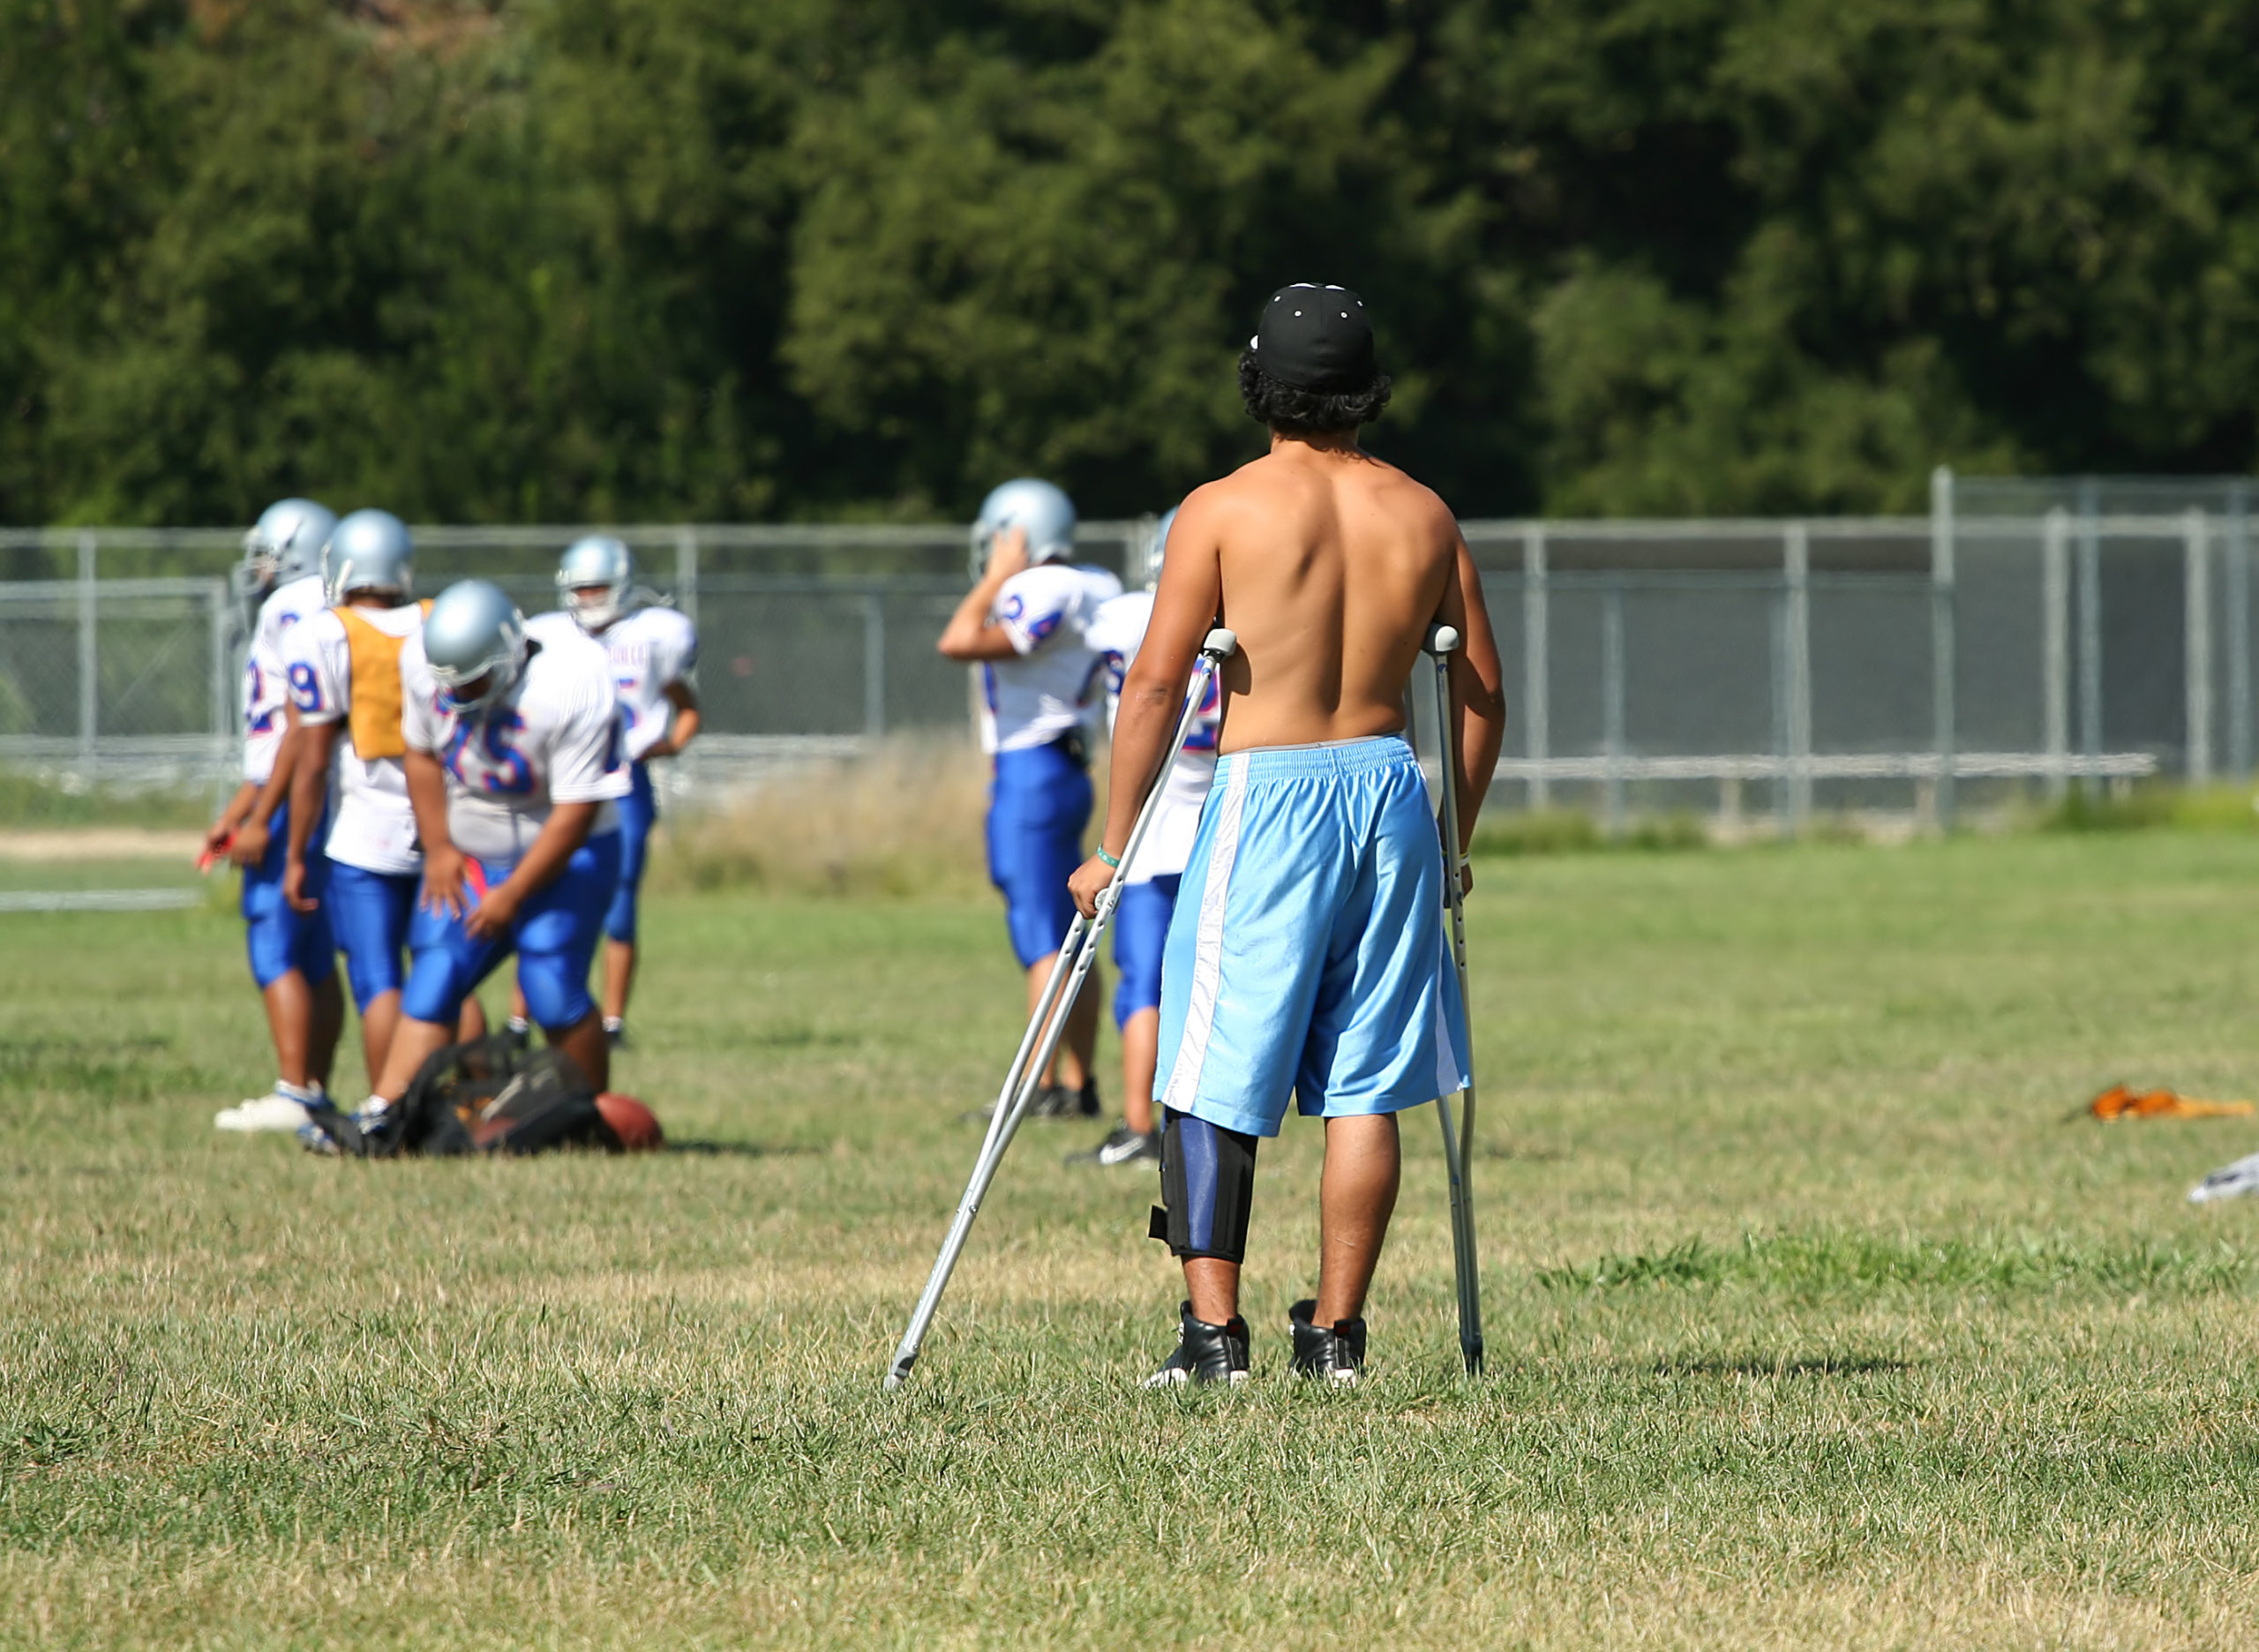  Sidelined college football player watches team practice.